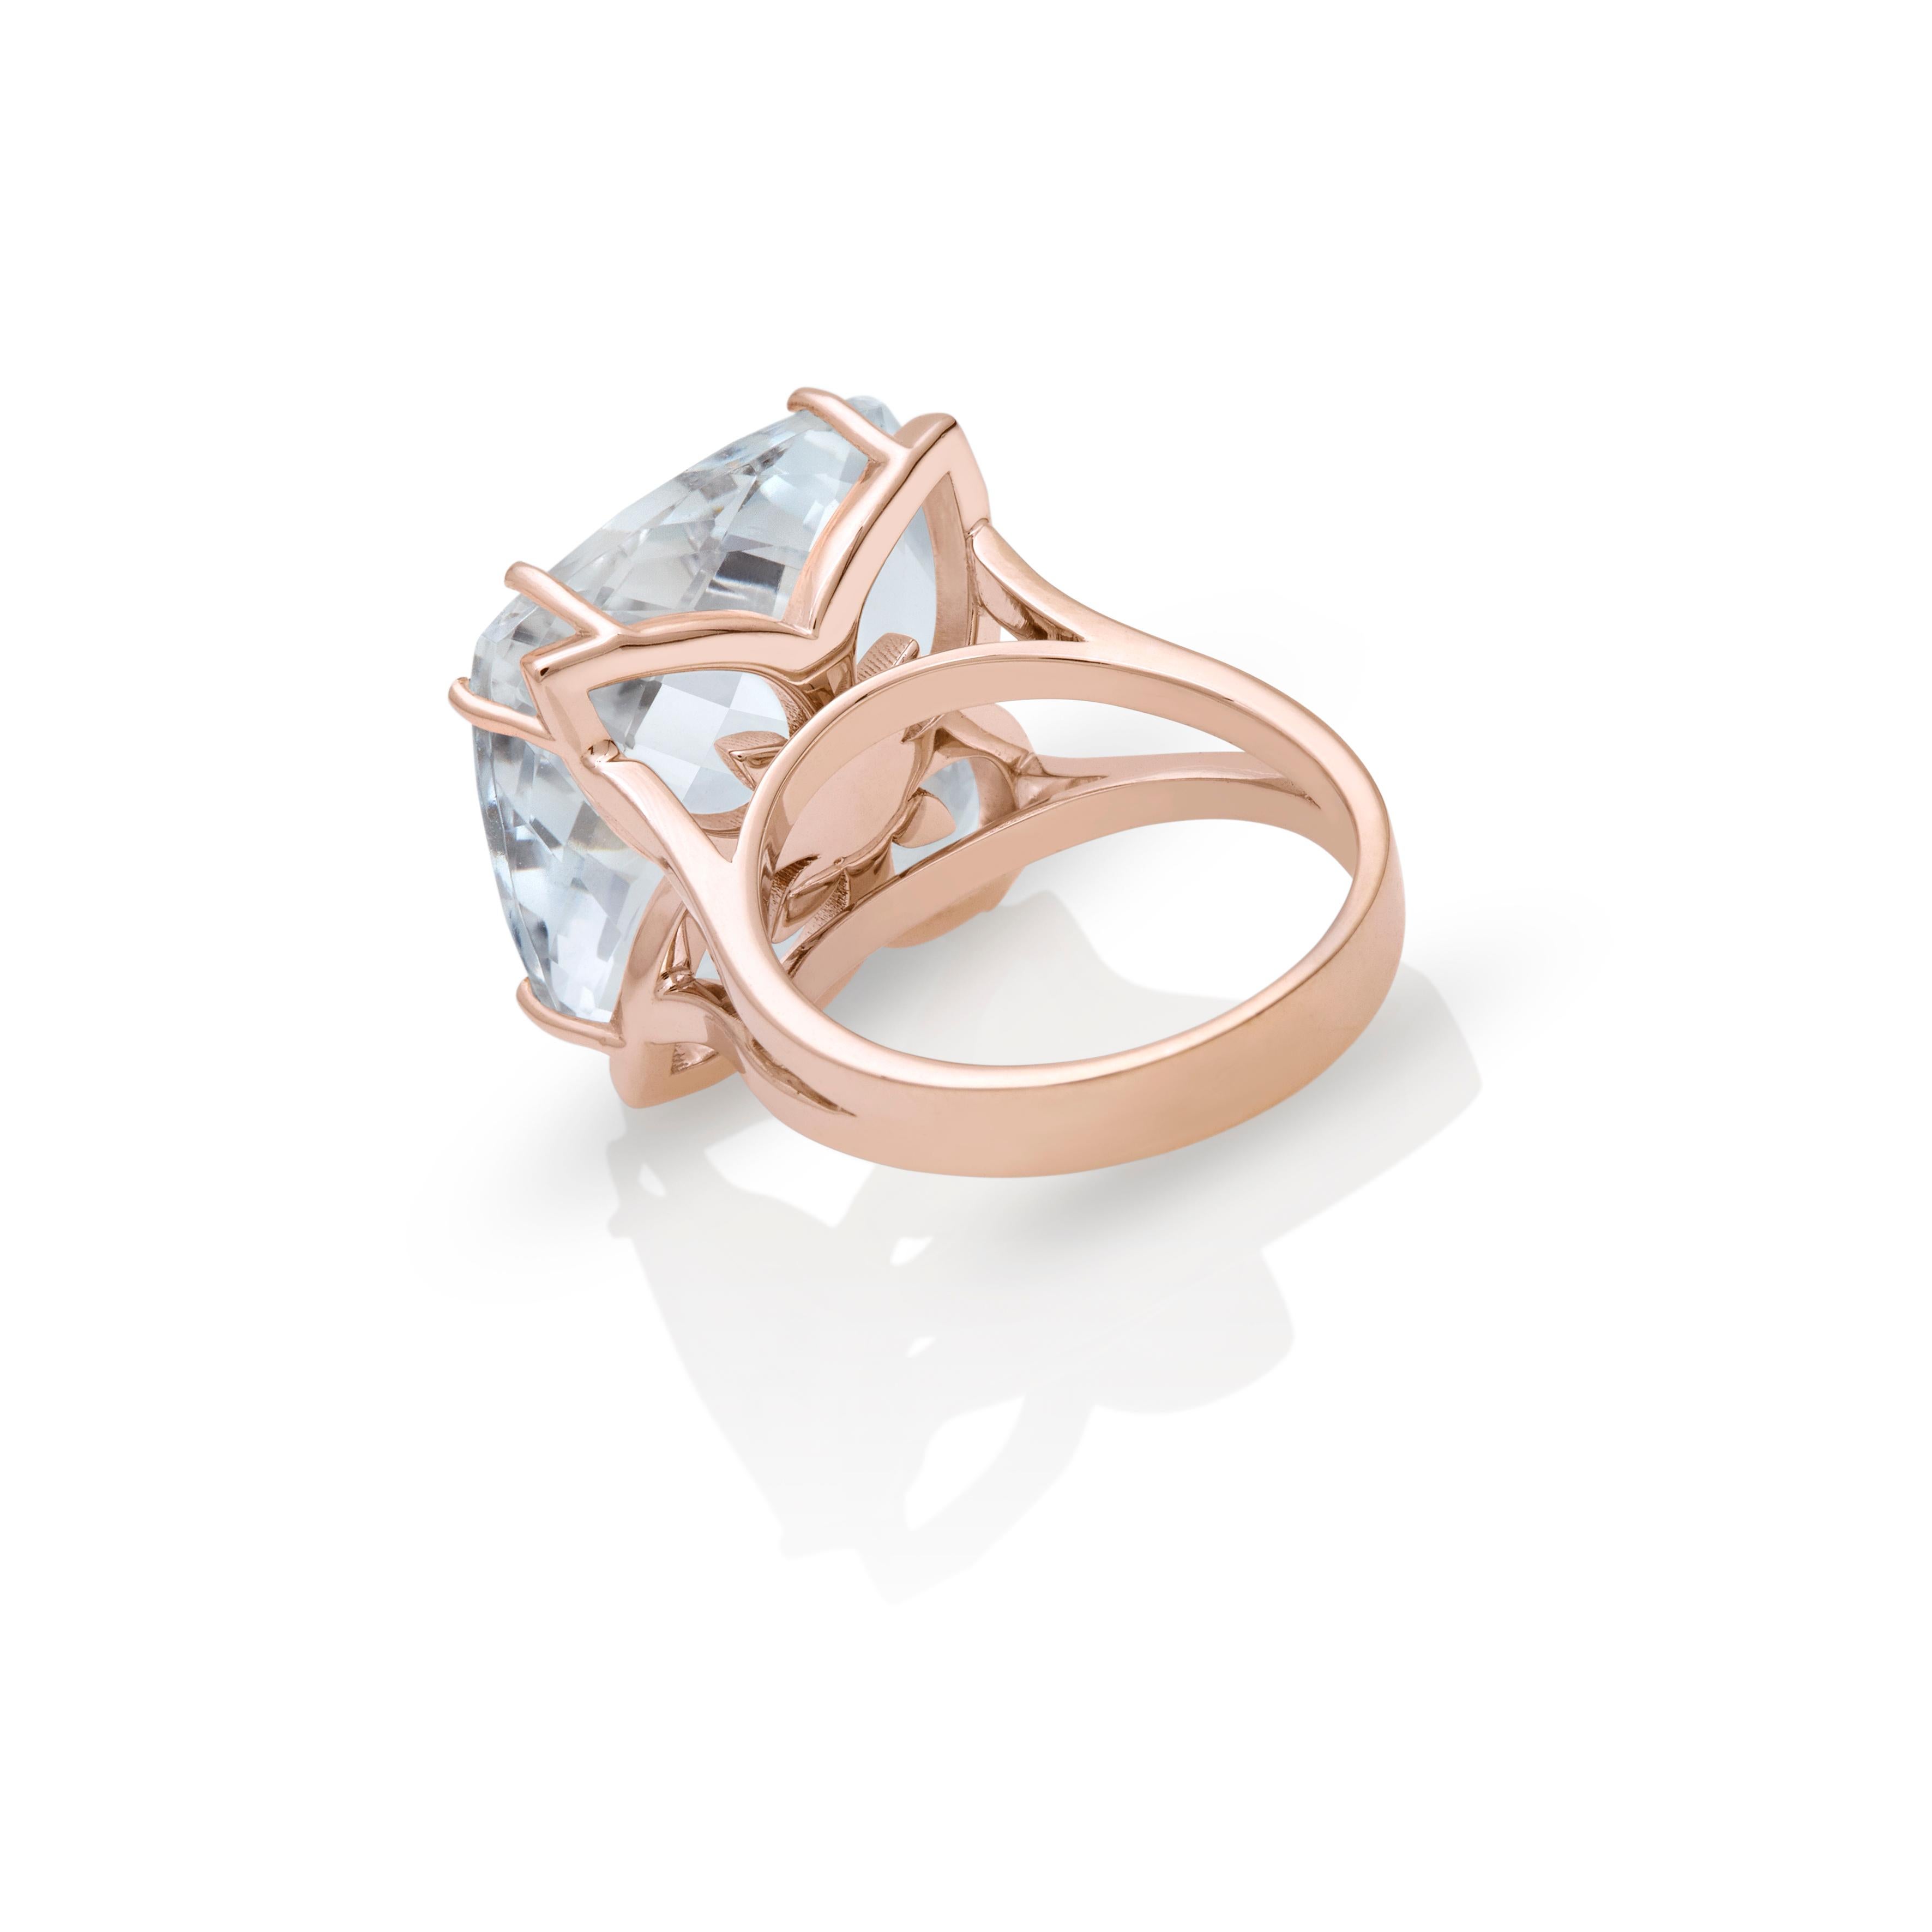 18kt Rose Gold Clear Royal Quartz ring 19.00 carat with Diamonds 0,08 ct Chakral Activator Ring by Nicofilimon.
An exquisite handcrafted 18kt gold with a royal quartz cushion briolette cut & diamonds ring that defines elegance and refined